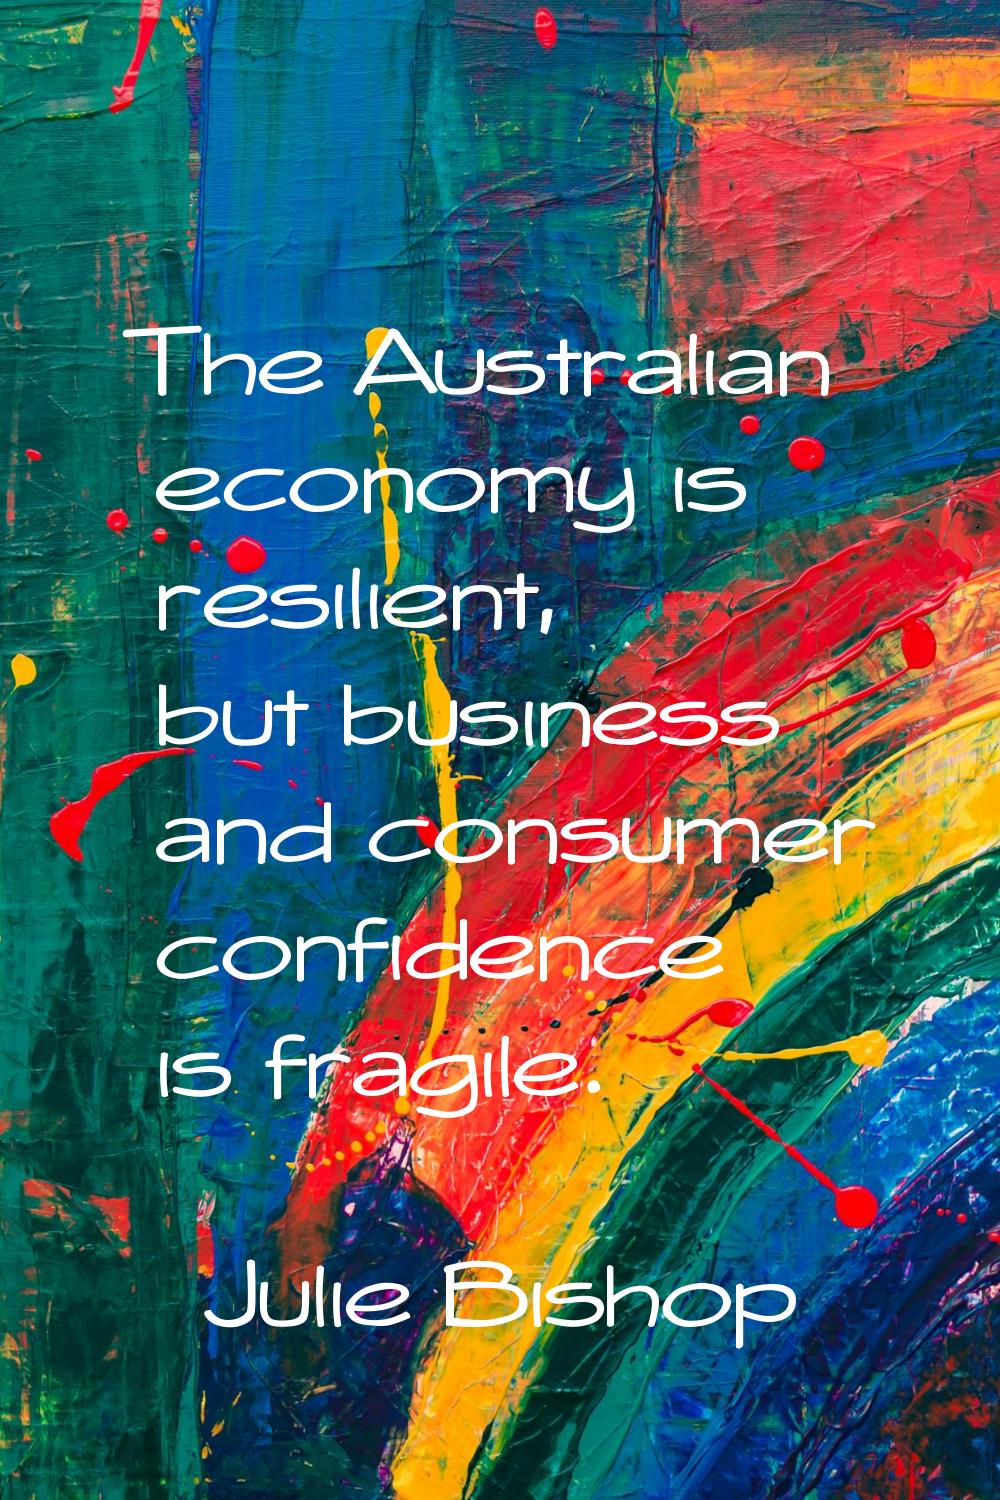 The Australian economy is resilient, but business and consumer confidence is fragile.